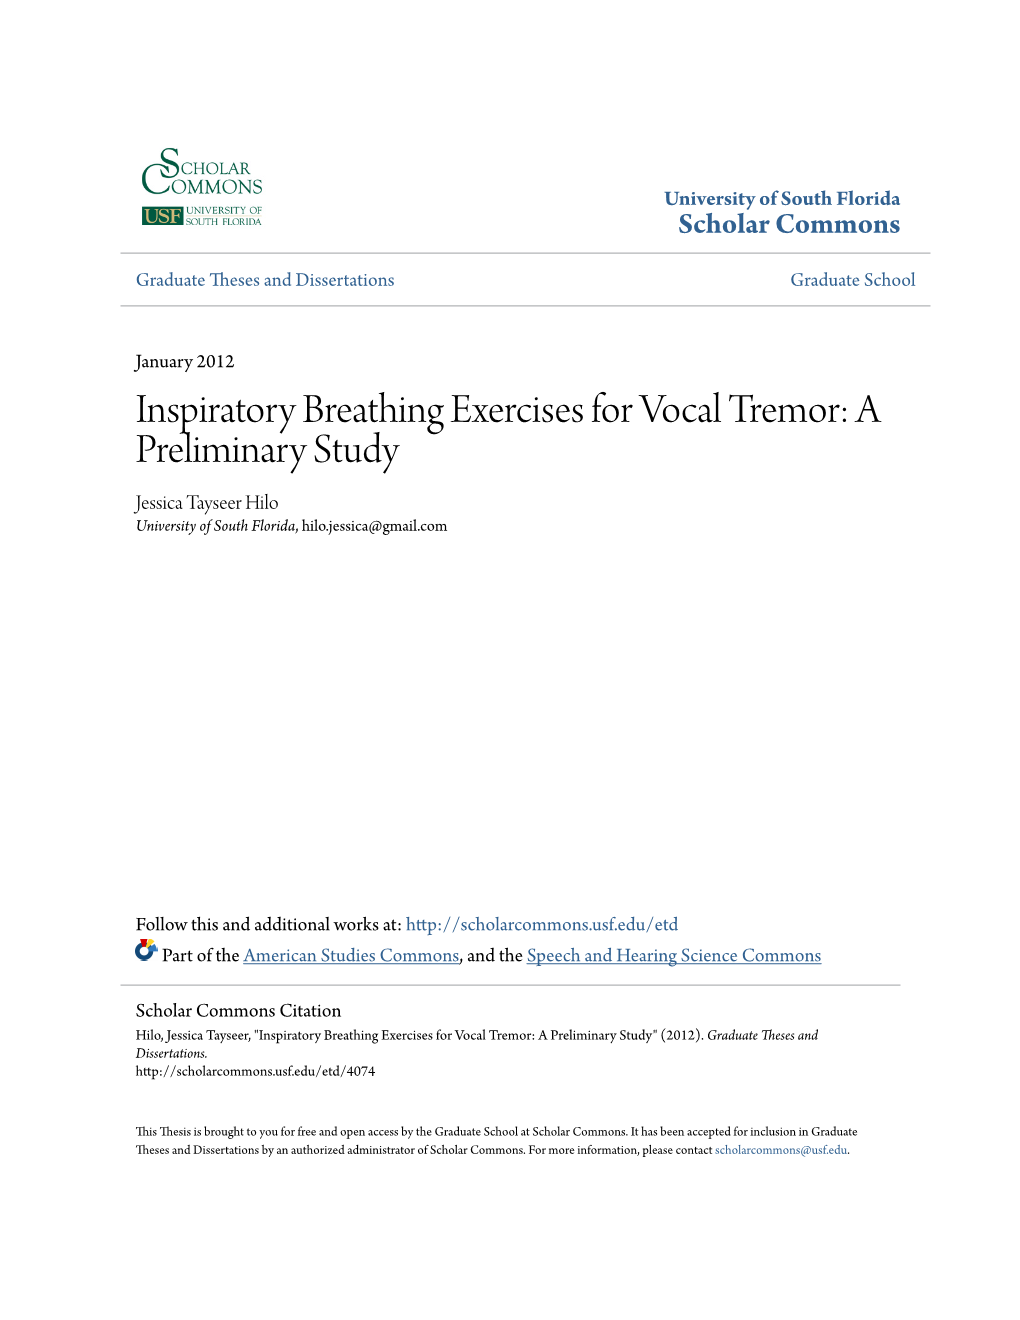 Inspiratory Breathing Exercises for Vocal Tremor: a Preliminary Study Jessica Tayseer Hilo University of South Florida, Hilo.Jessica@Gmail.Com